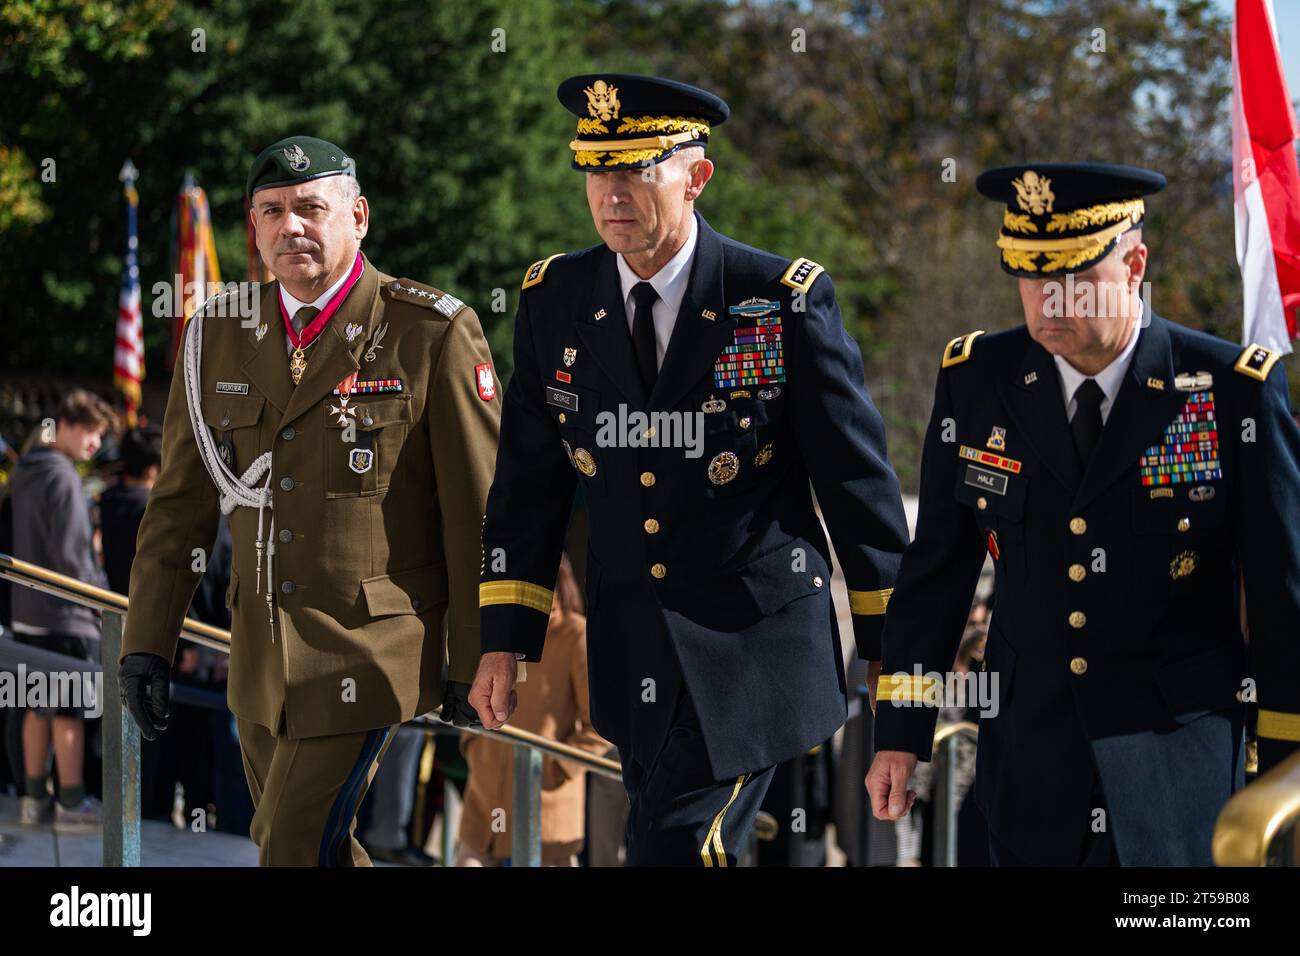 Arlington, United States Of America. 02nd Nov, 2023. Arlington, United States of America. 02 November, 2023. Chief of the General Staff of the Polish Armed Forces, Lt. Gen. Wieslaw Kukula, left, U.S Army Chief of Staff Gen. Randy George, center, and Special Assistant to the Director of the Army Staff, Maj. Gen. Anthony Hale, participate in an armed forces full honors wreath-laying ceremony at the Tomb of the Unknown Soldier at Arlington National Cemetery, November 2, 2023 in Arlington, Virginia, USA. Credit: Henry Villarama/U.S. Army/Alamy Live News Stock Photo